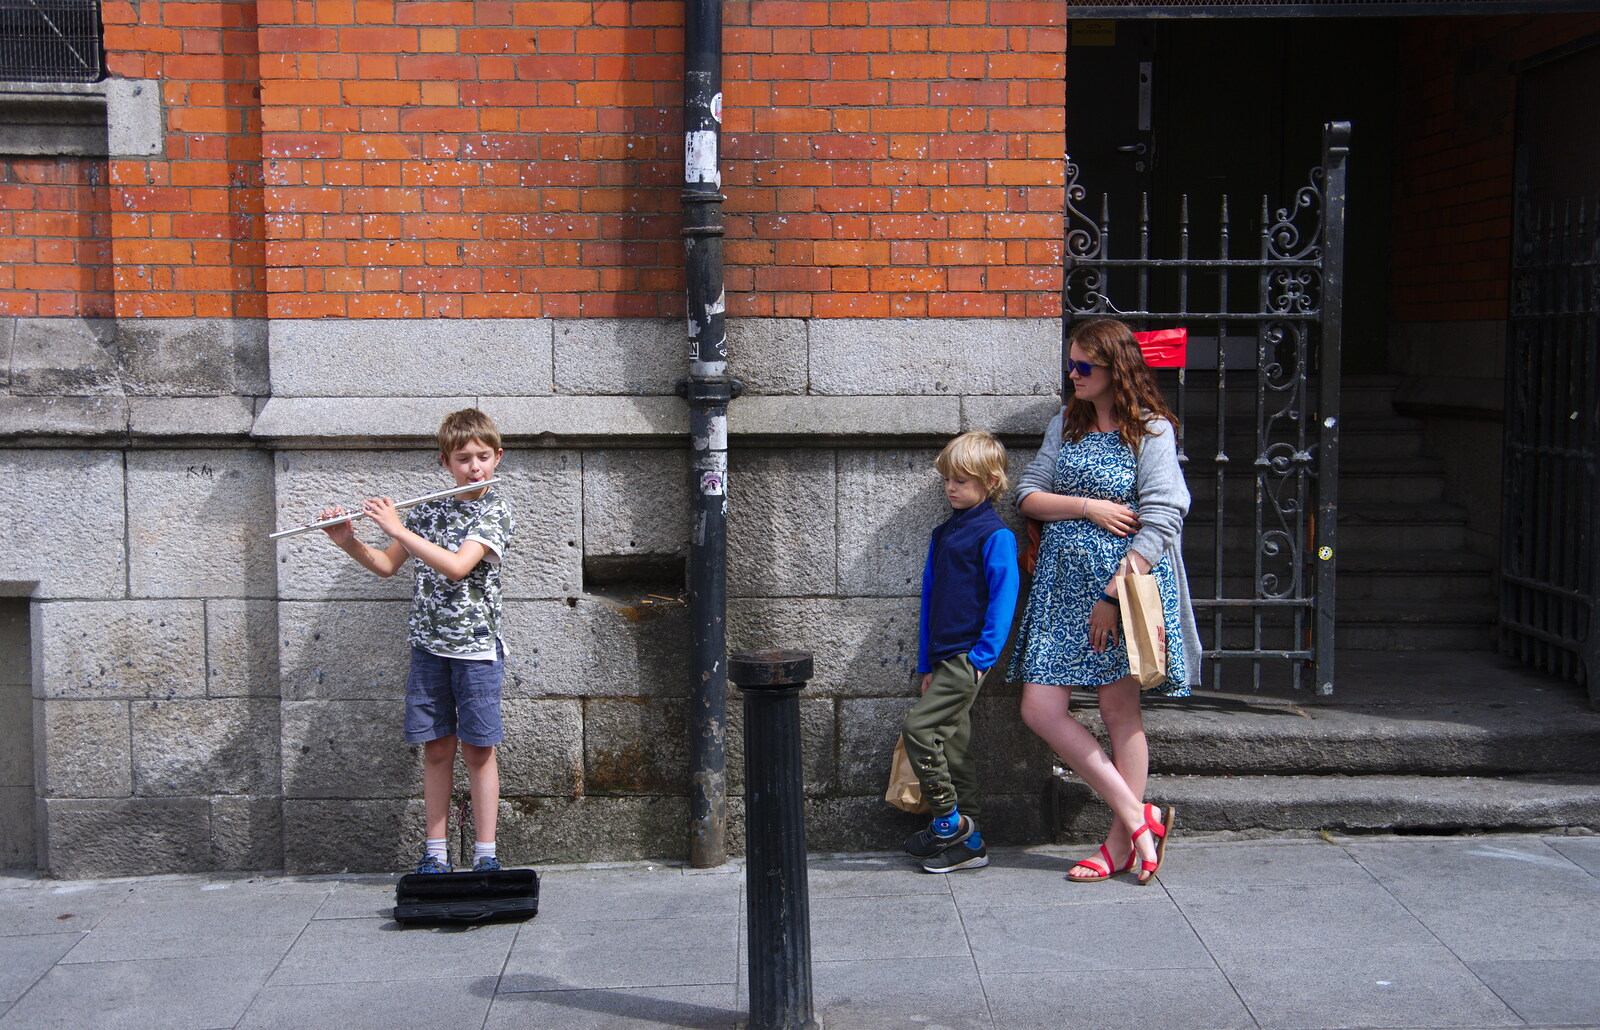 Hanging around outside Huey Morgan's old pizza place from Busking in Temple Bar, Dublin, Ireland - 12th August 2019